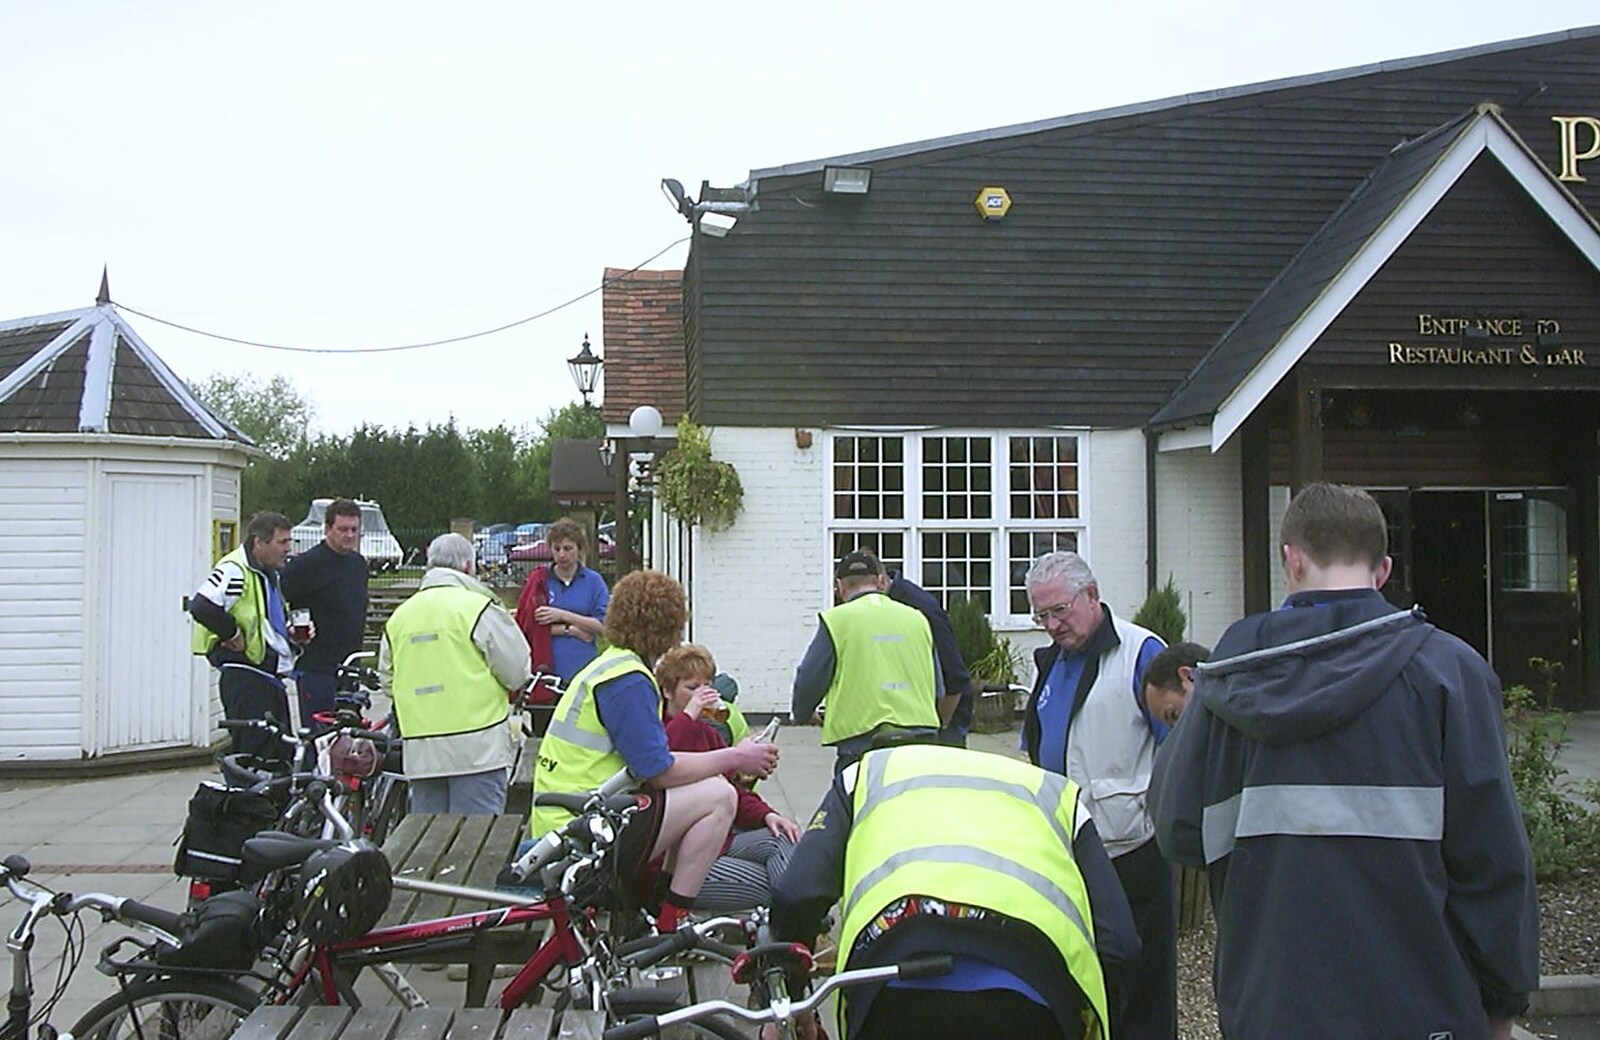 The BSCC Bike Ride, Shefford, Bedford - 11th May 2002: We're at the first pub